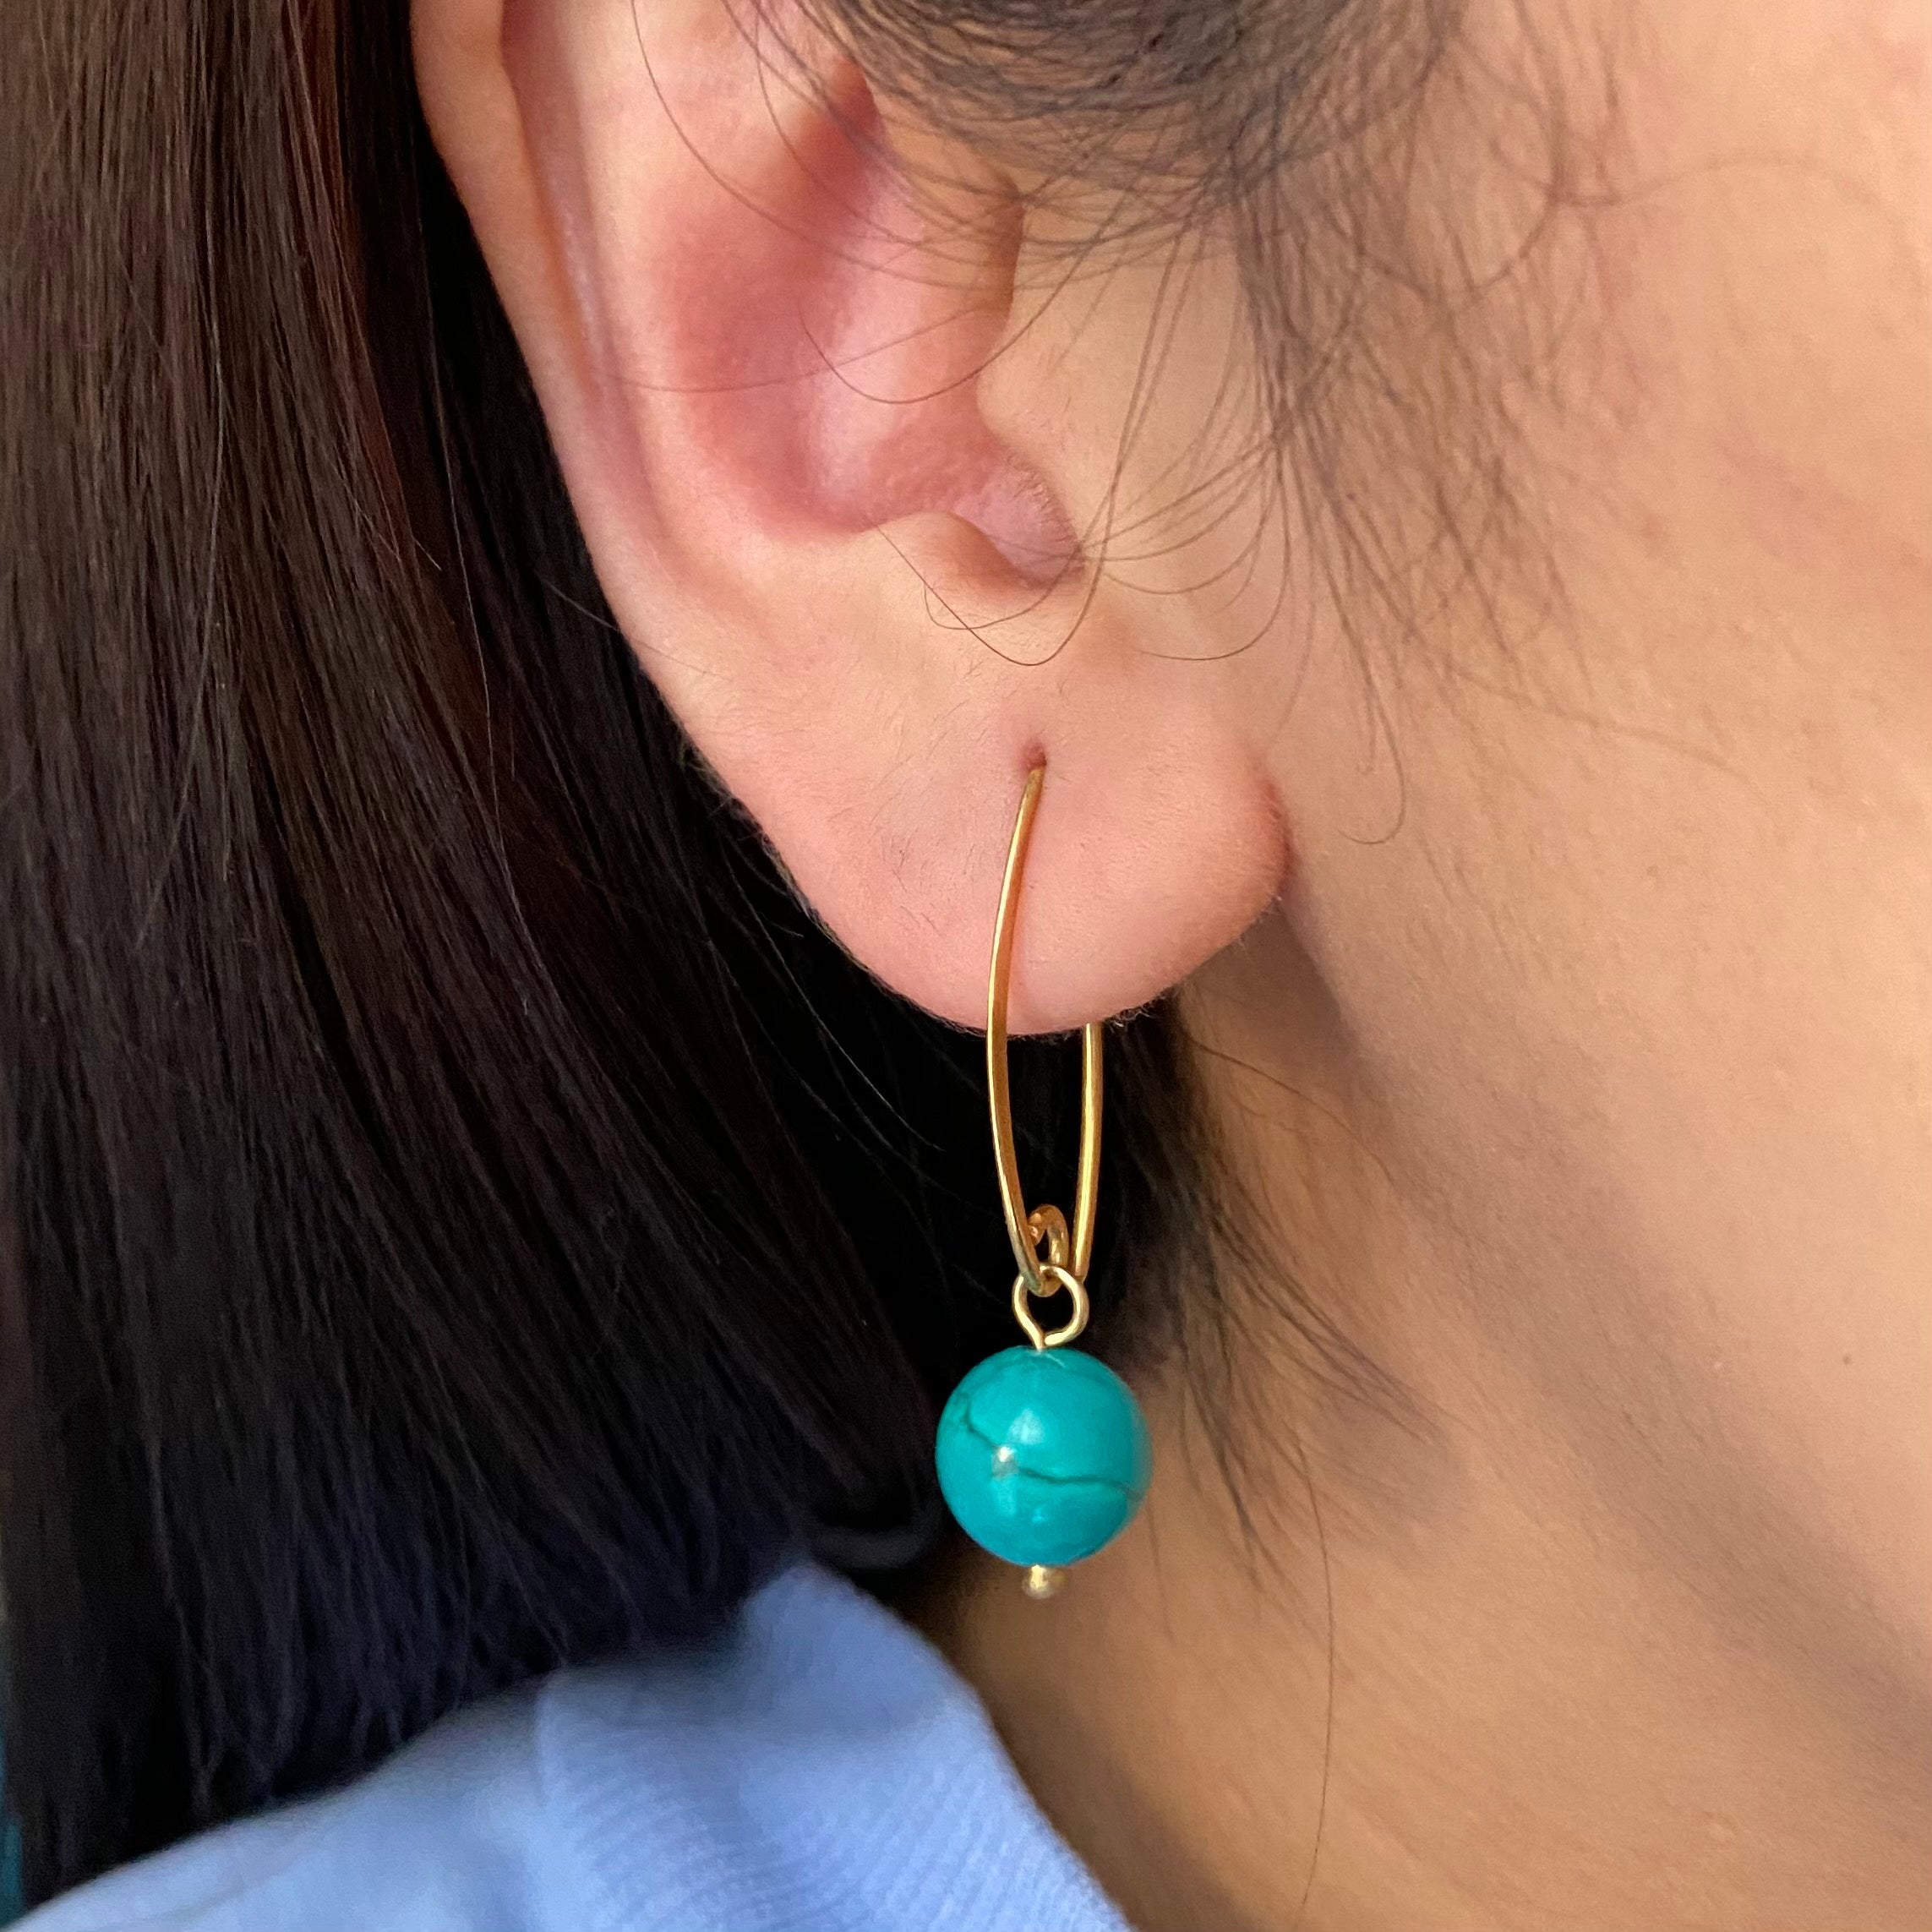 Gold Plated Sterling Silver Threader Earrings - Turquoise Drop